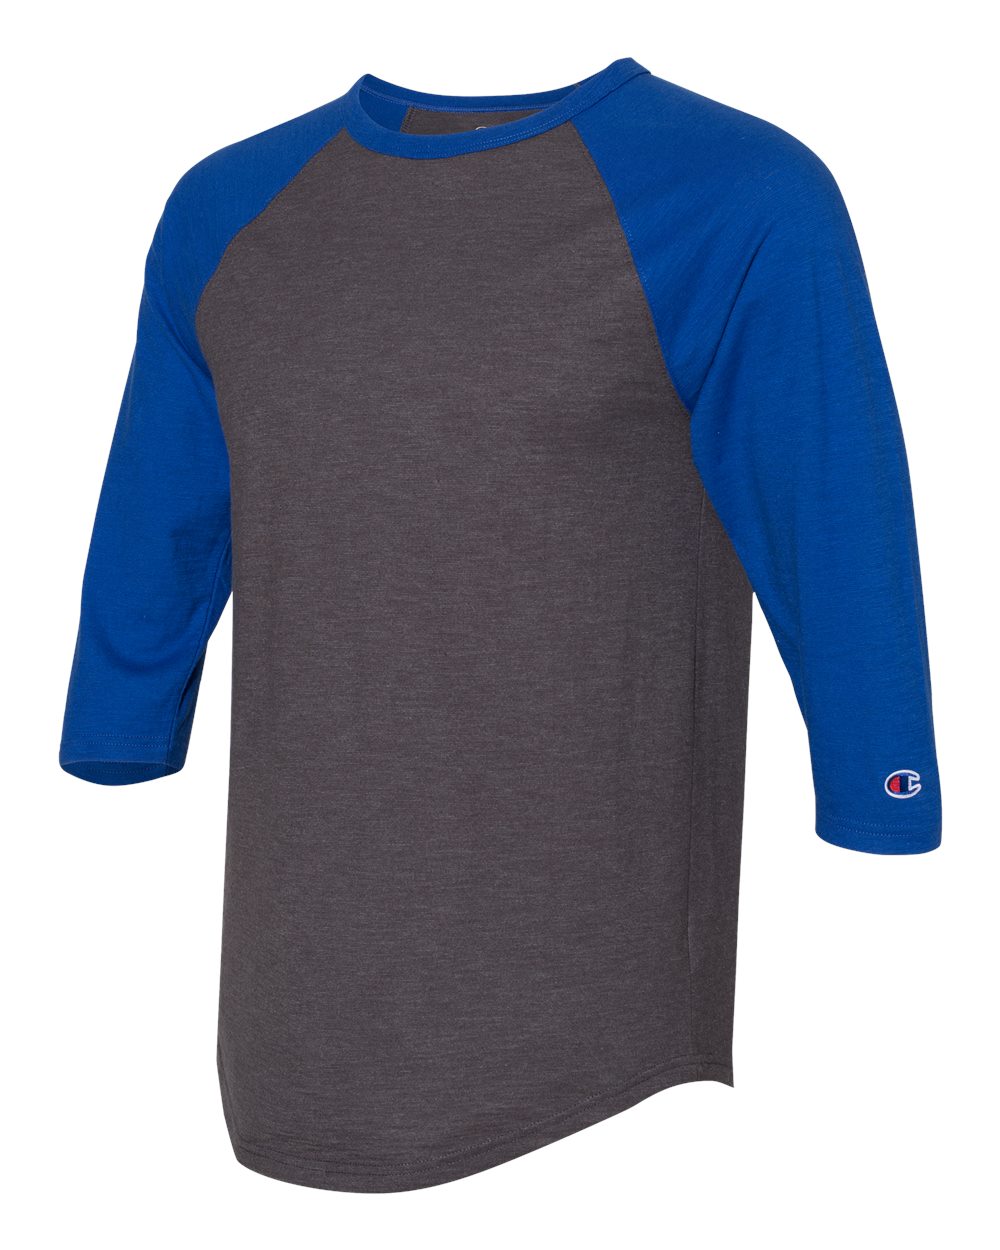 click to view Charcoal Heather/ Athletic Royal